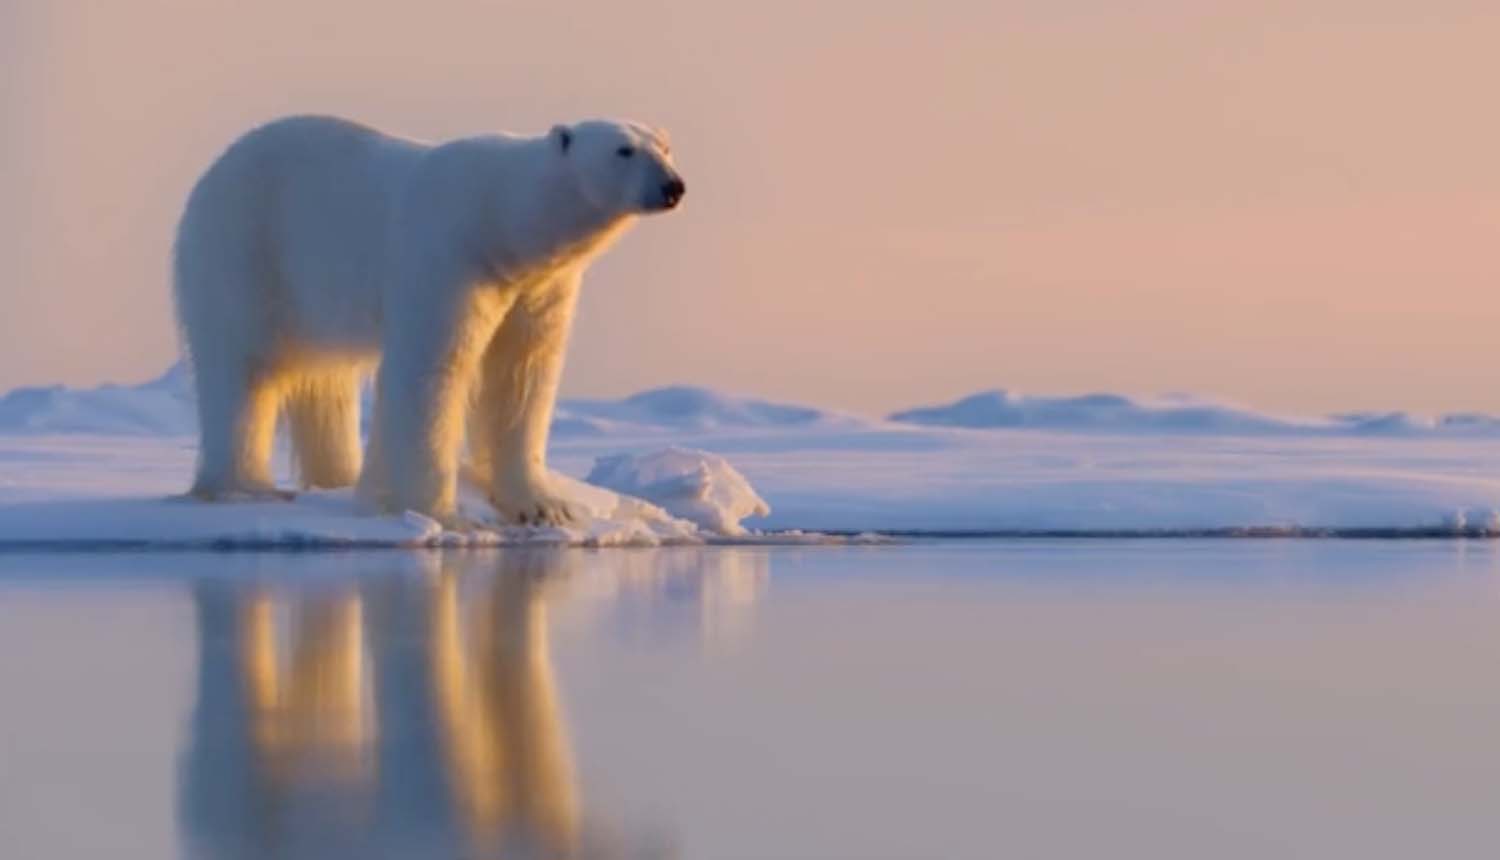 Just chilling: Polar bear has an ice relaxing time in the snow - World News  - Mirror Online